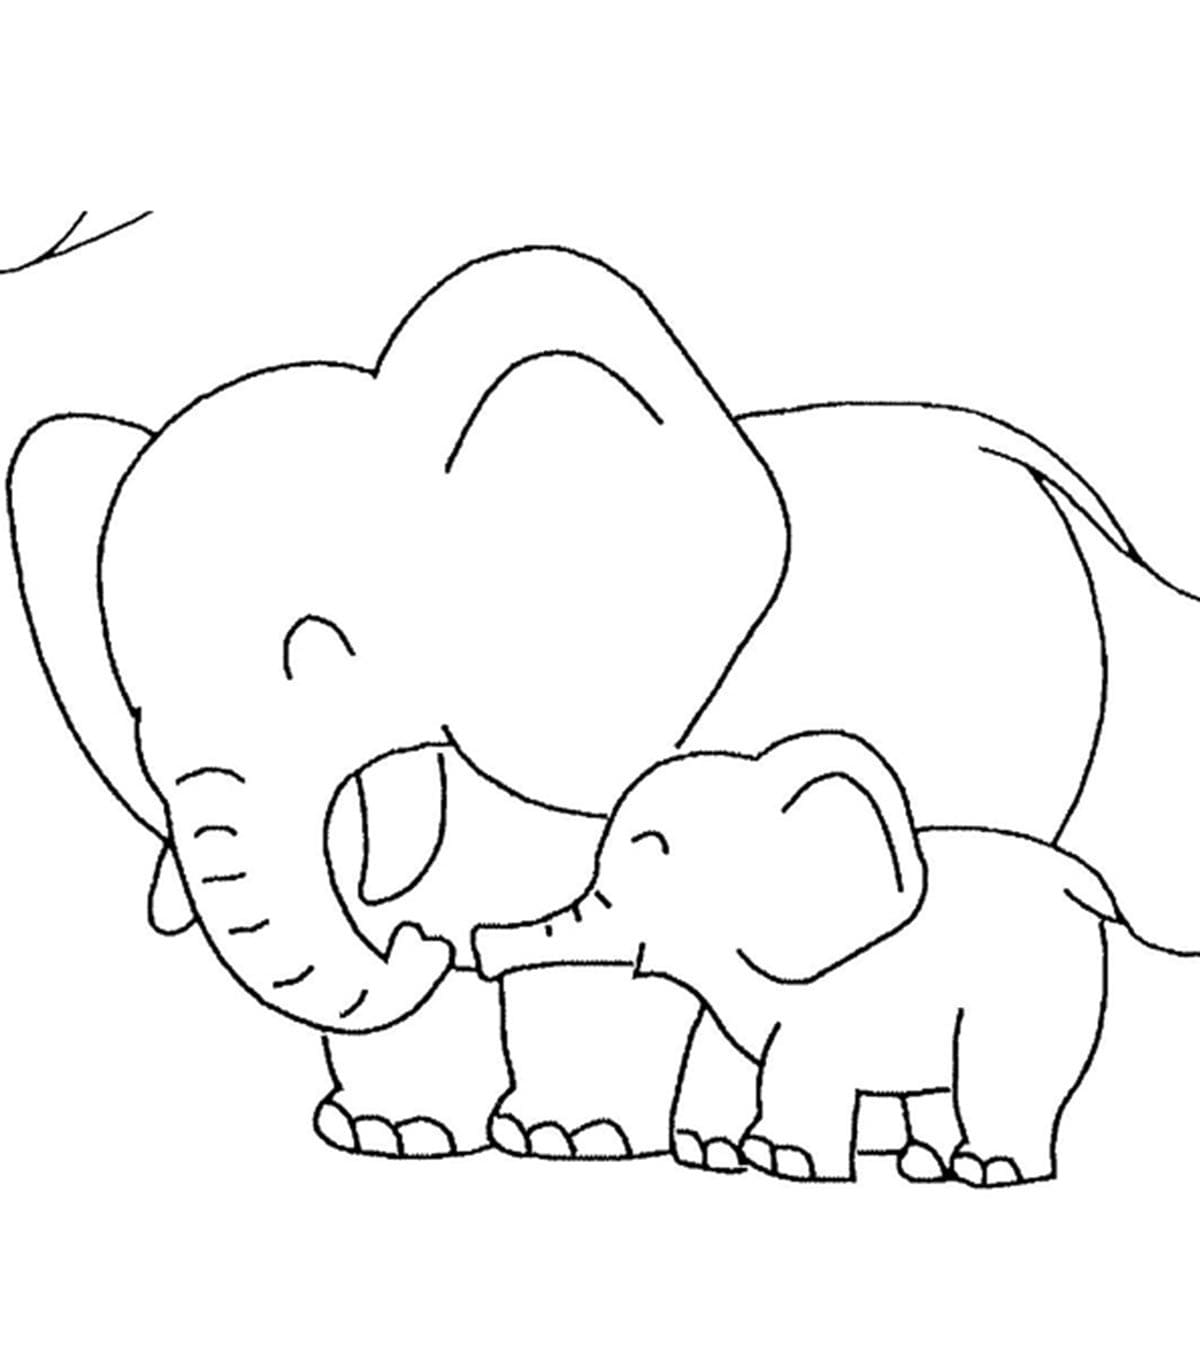 Raskrasil.com-Coloring-Pages-Baby-Animals-105